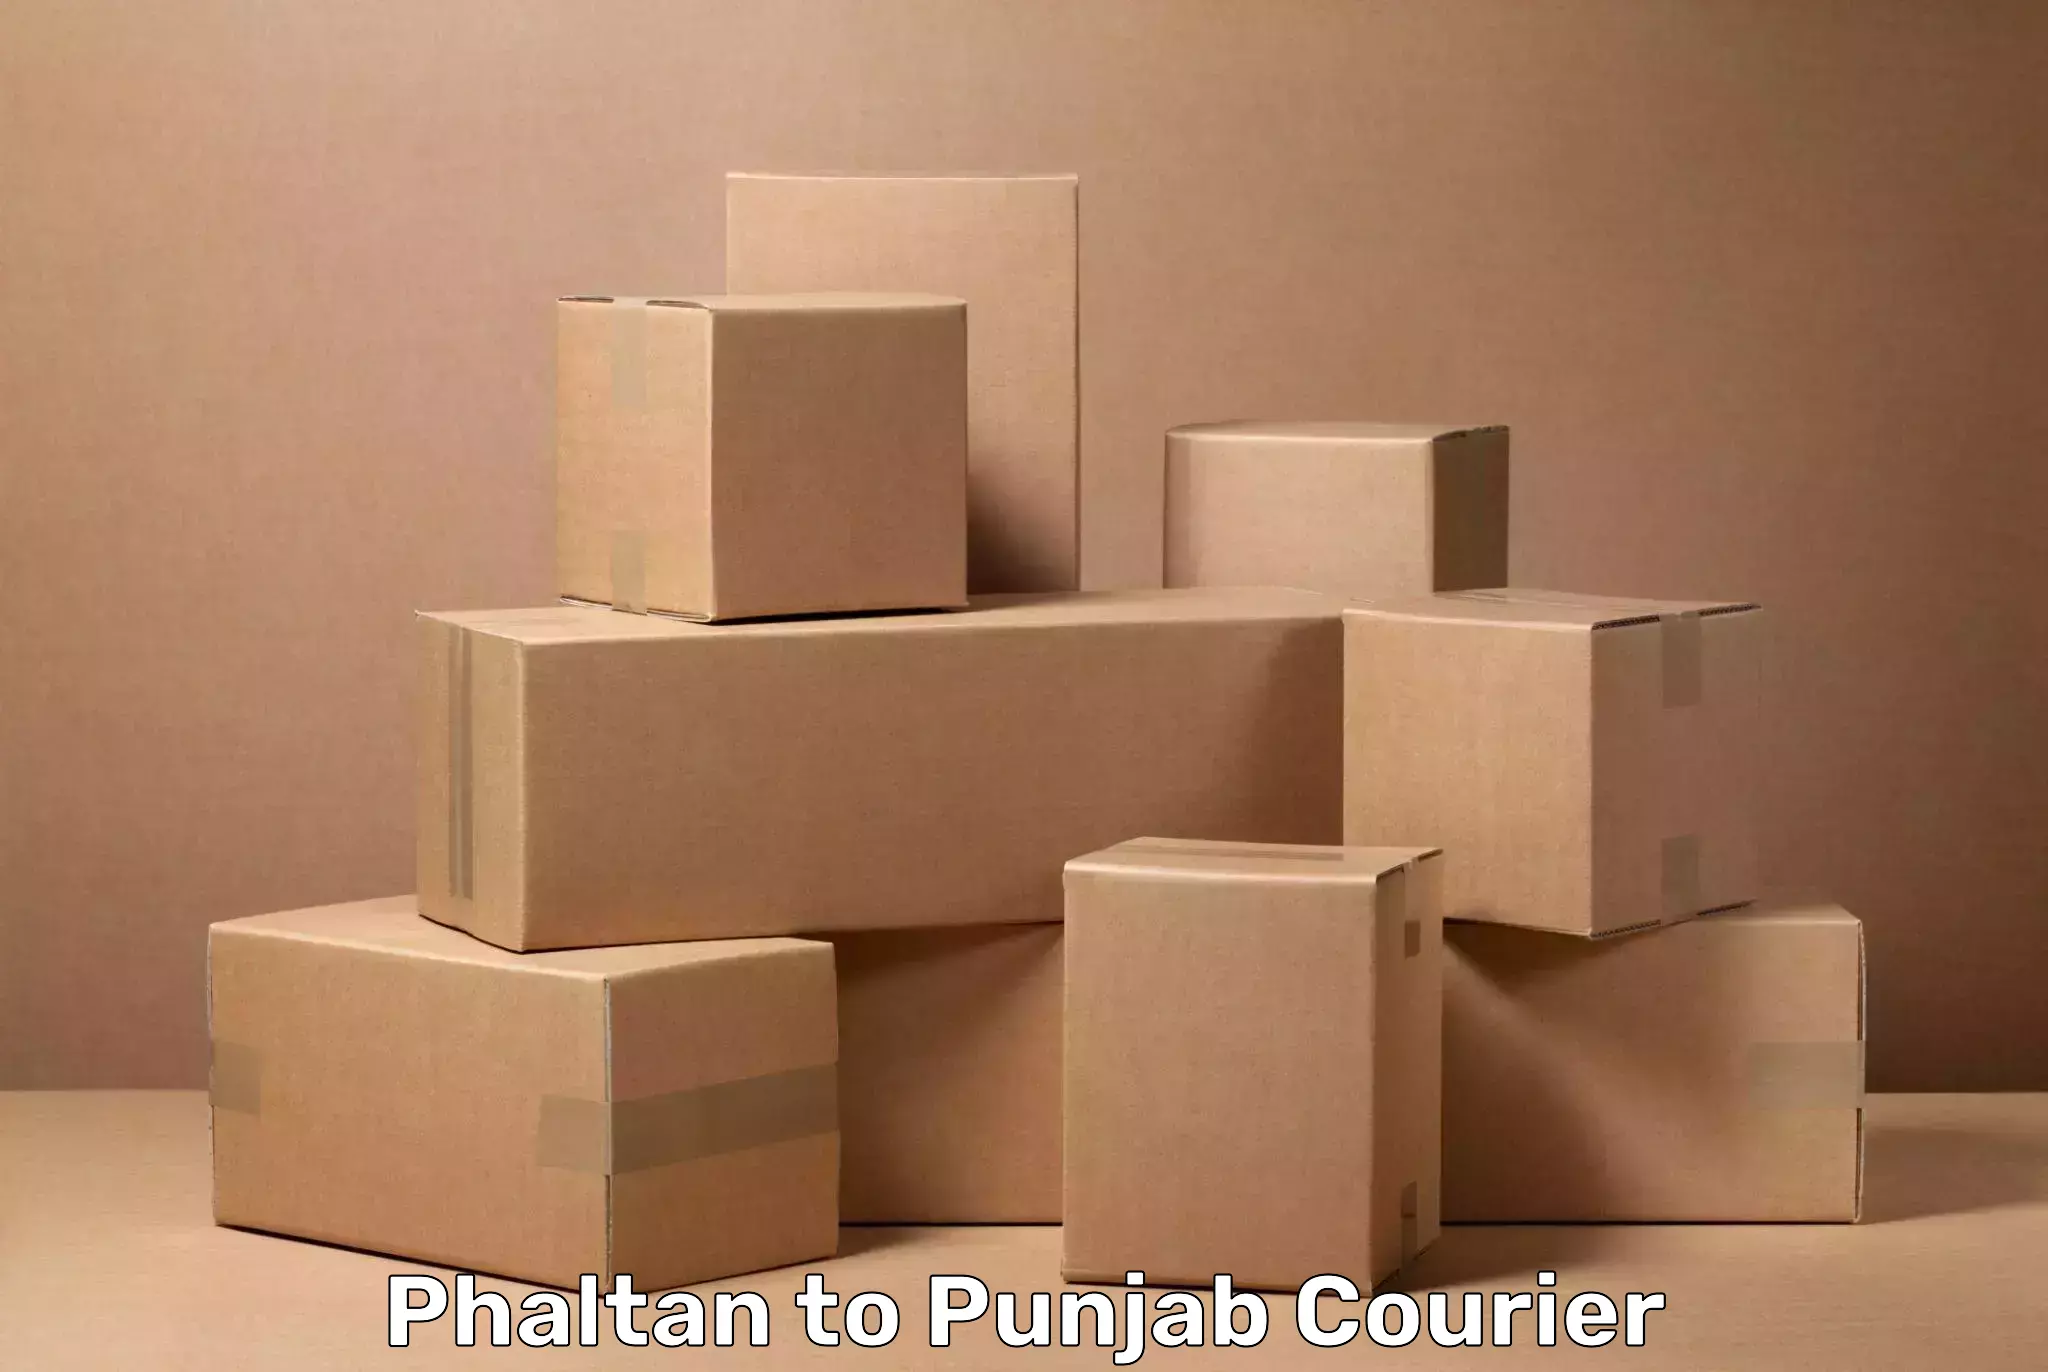 Luggage delivery network Phaltan to Mohali